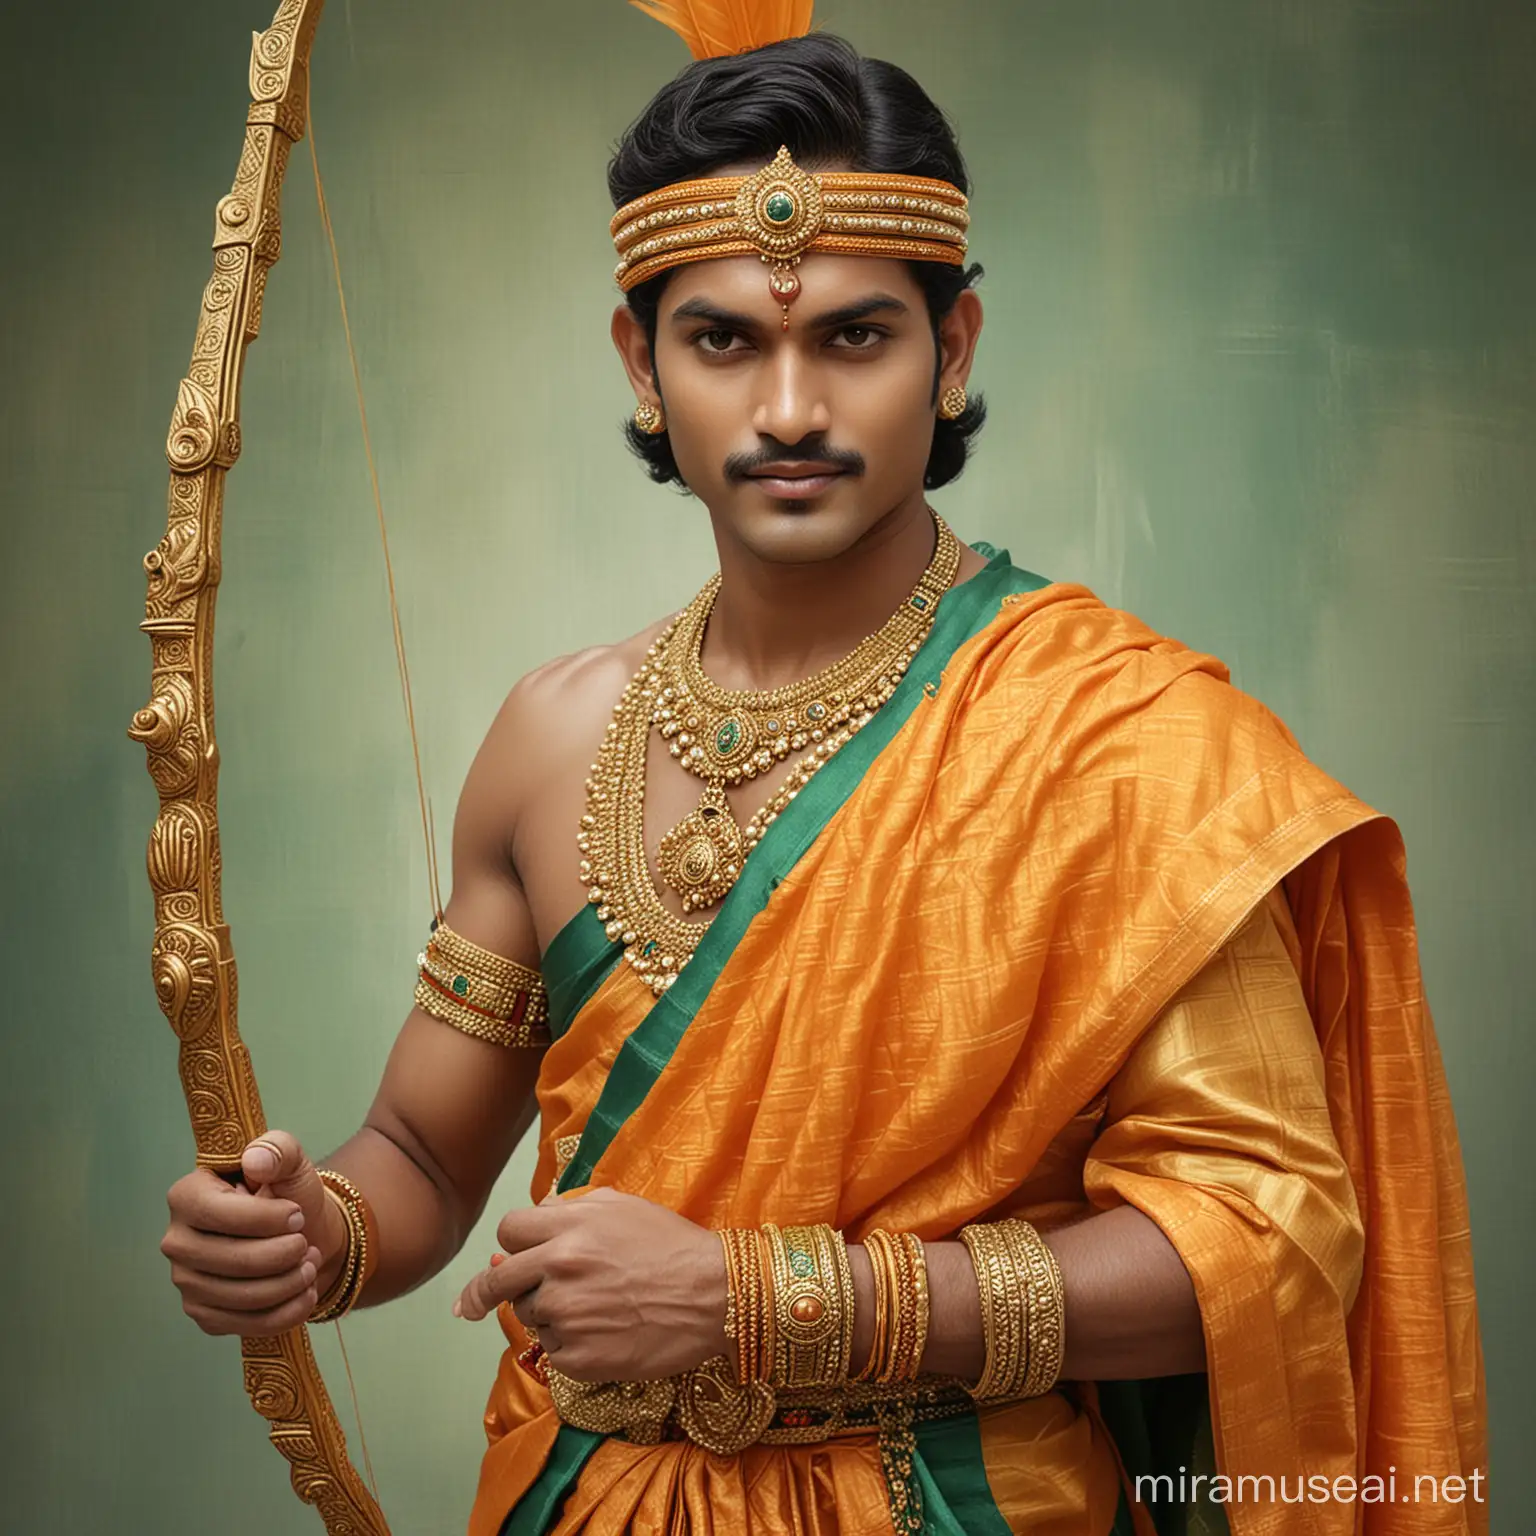 the most handsome looking prince Marayadha purushotham Sri Rama Chandra in ethnic cloths of golden orange and sea green colors. with a beautifully embellished bow and arrow in his hands